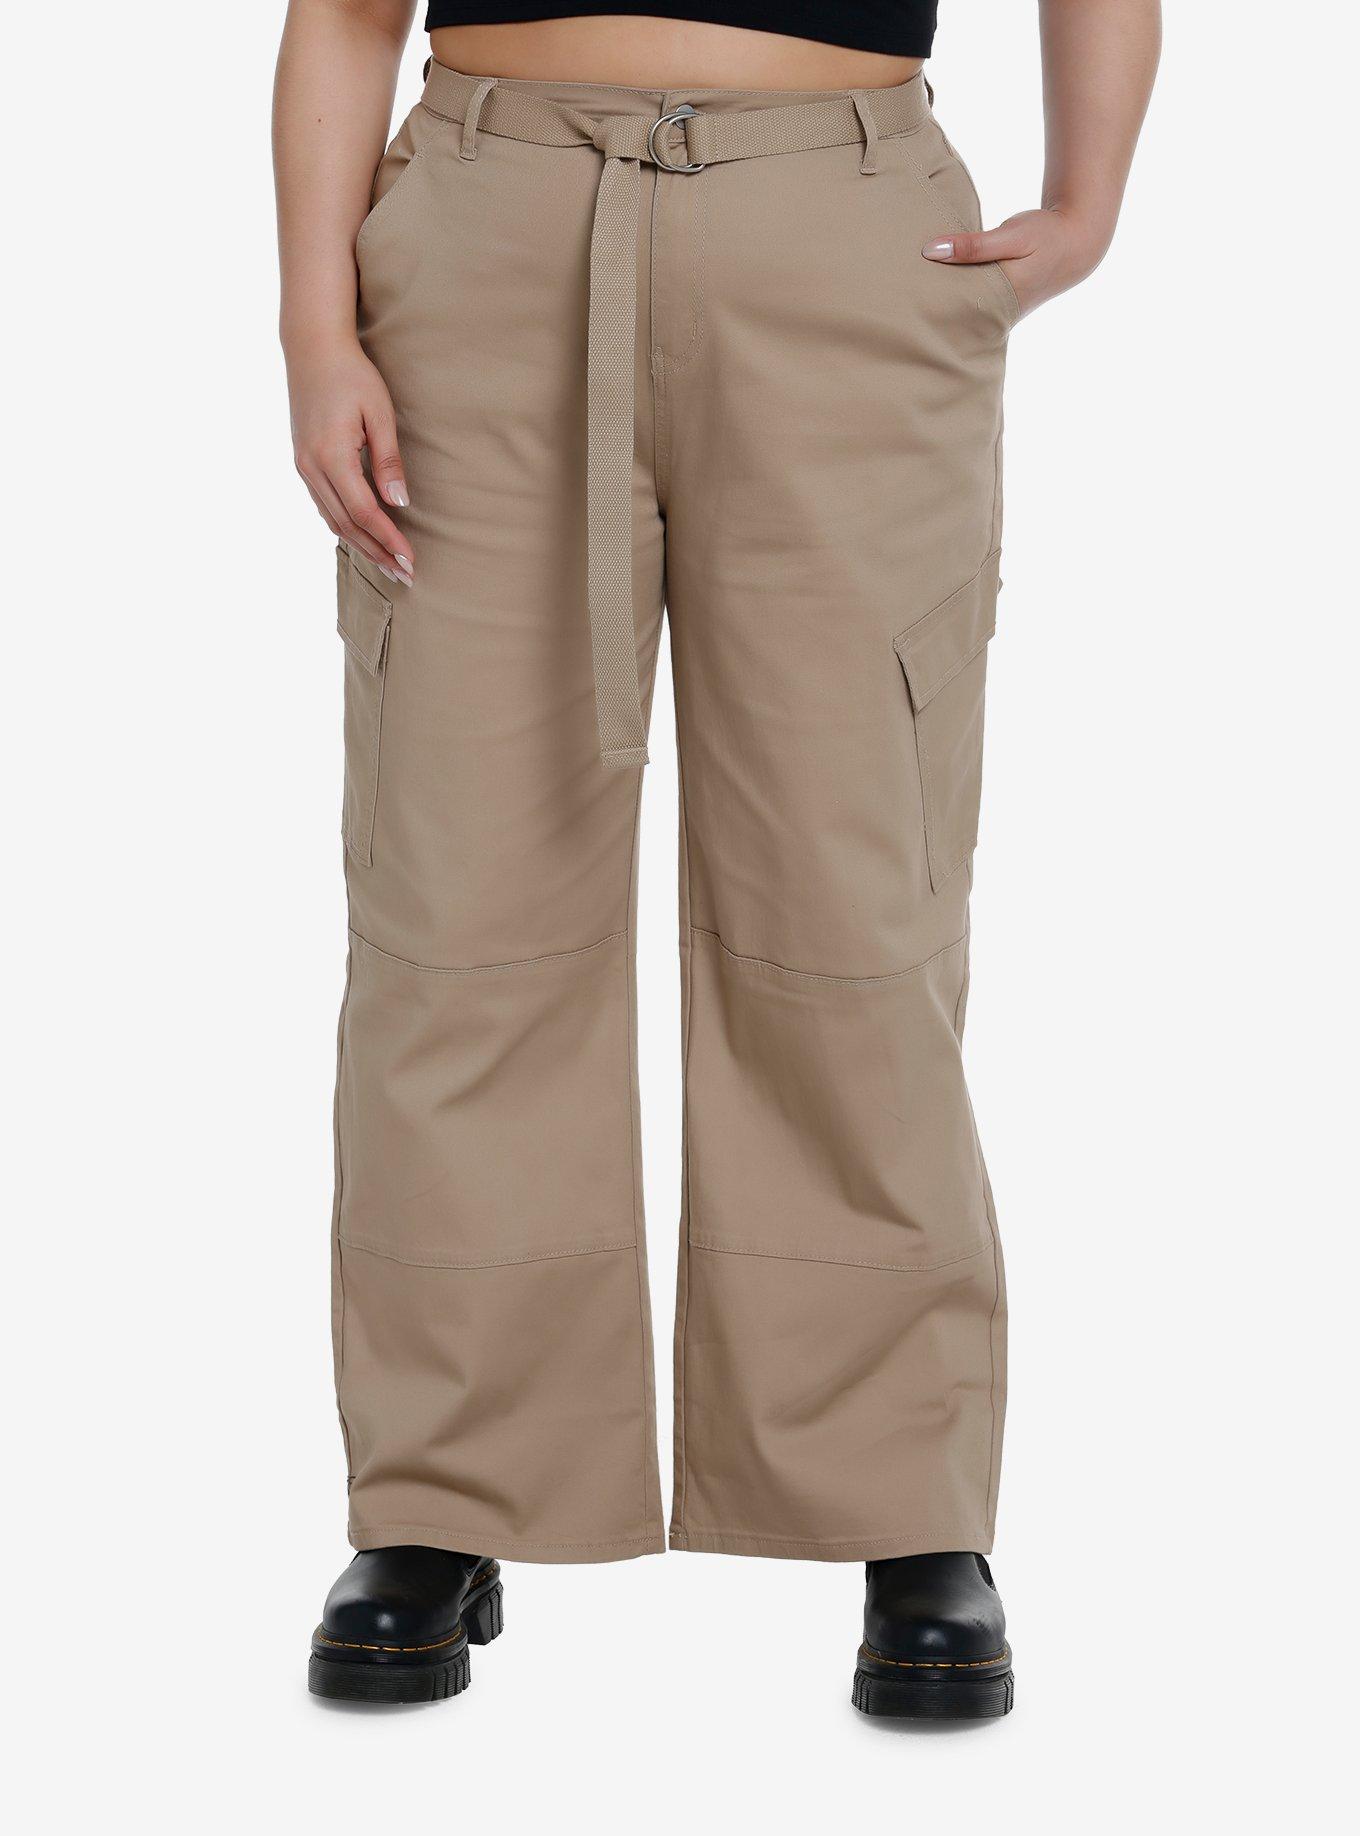 Khaki Belted Cargo Pants Plus Size | Hot Topic